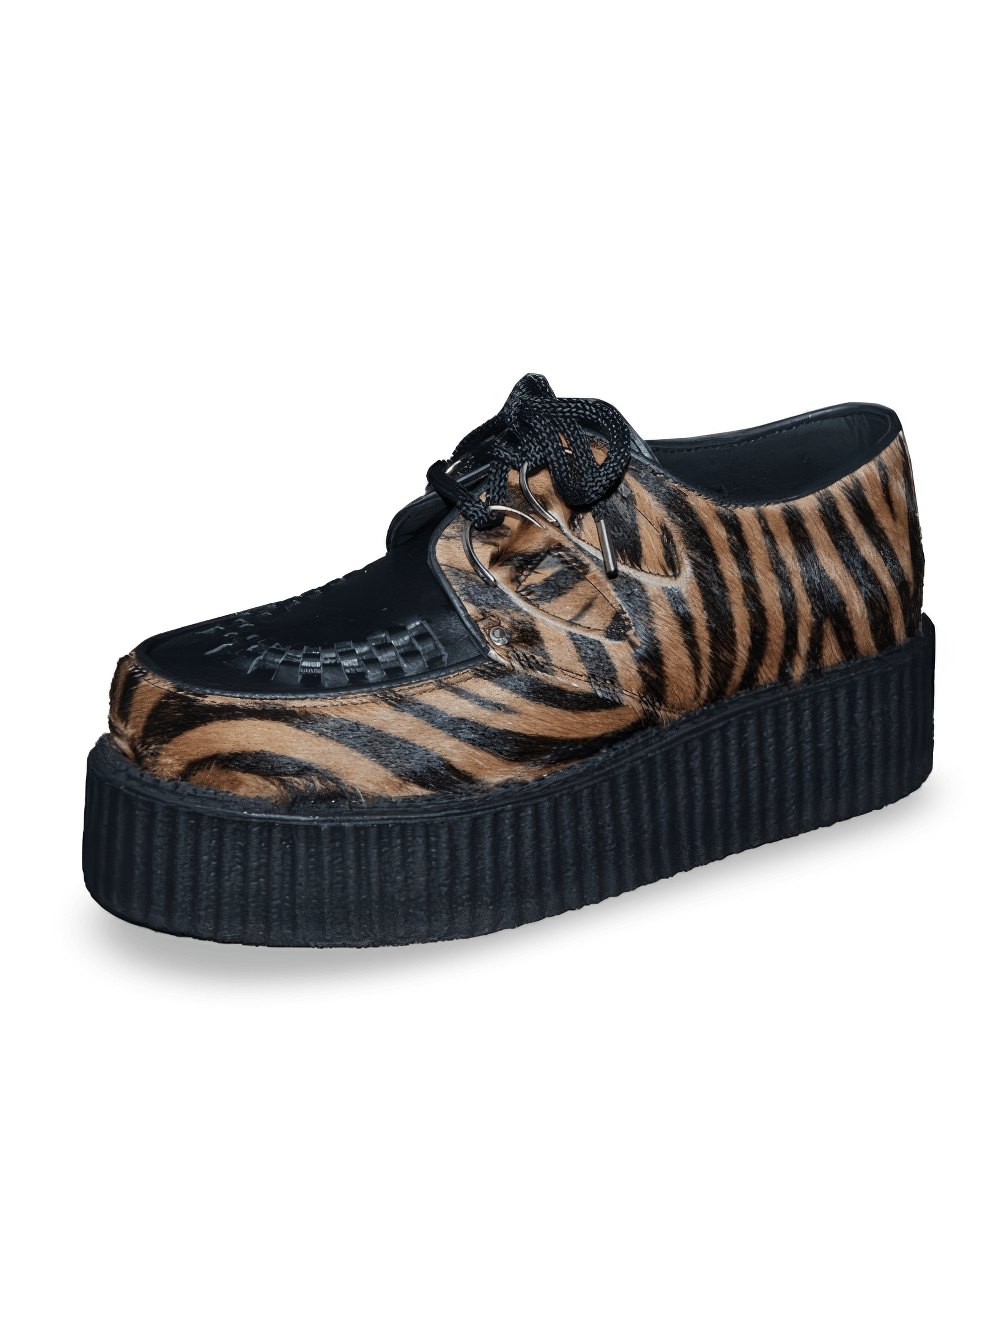 Unisex Zebra Pattern Leather and Fur Creepers